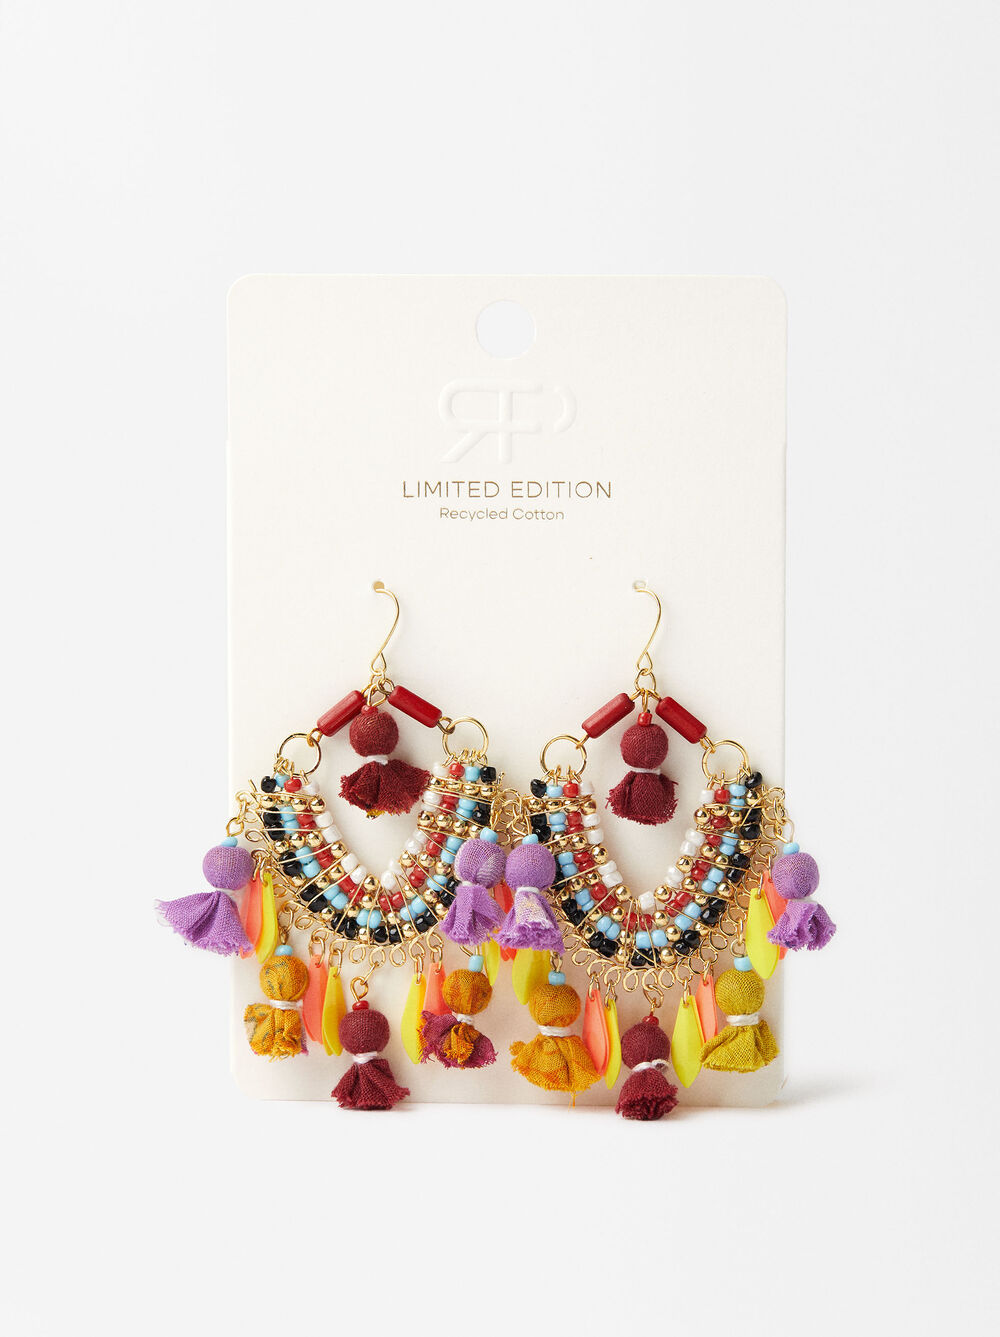 Recycled Cotton Petal Earrings - Limited Edition